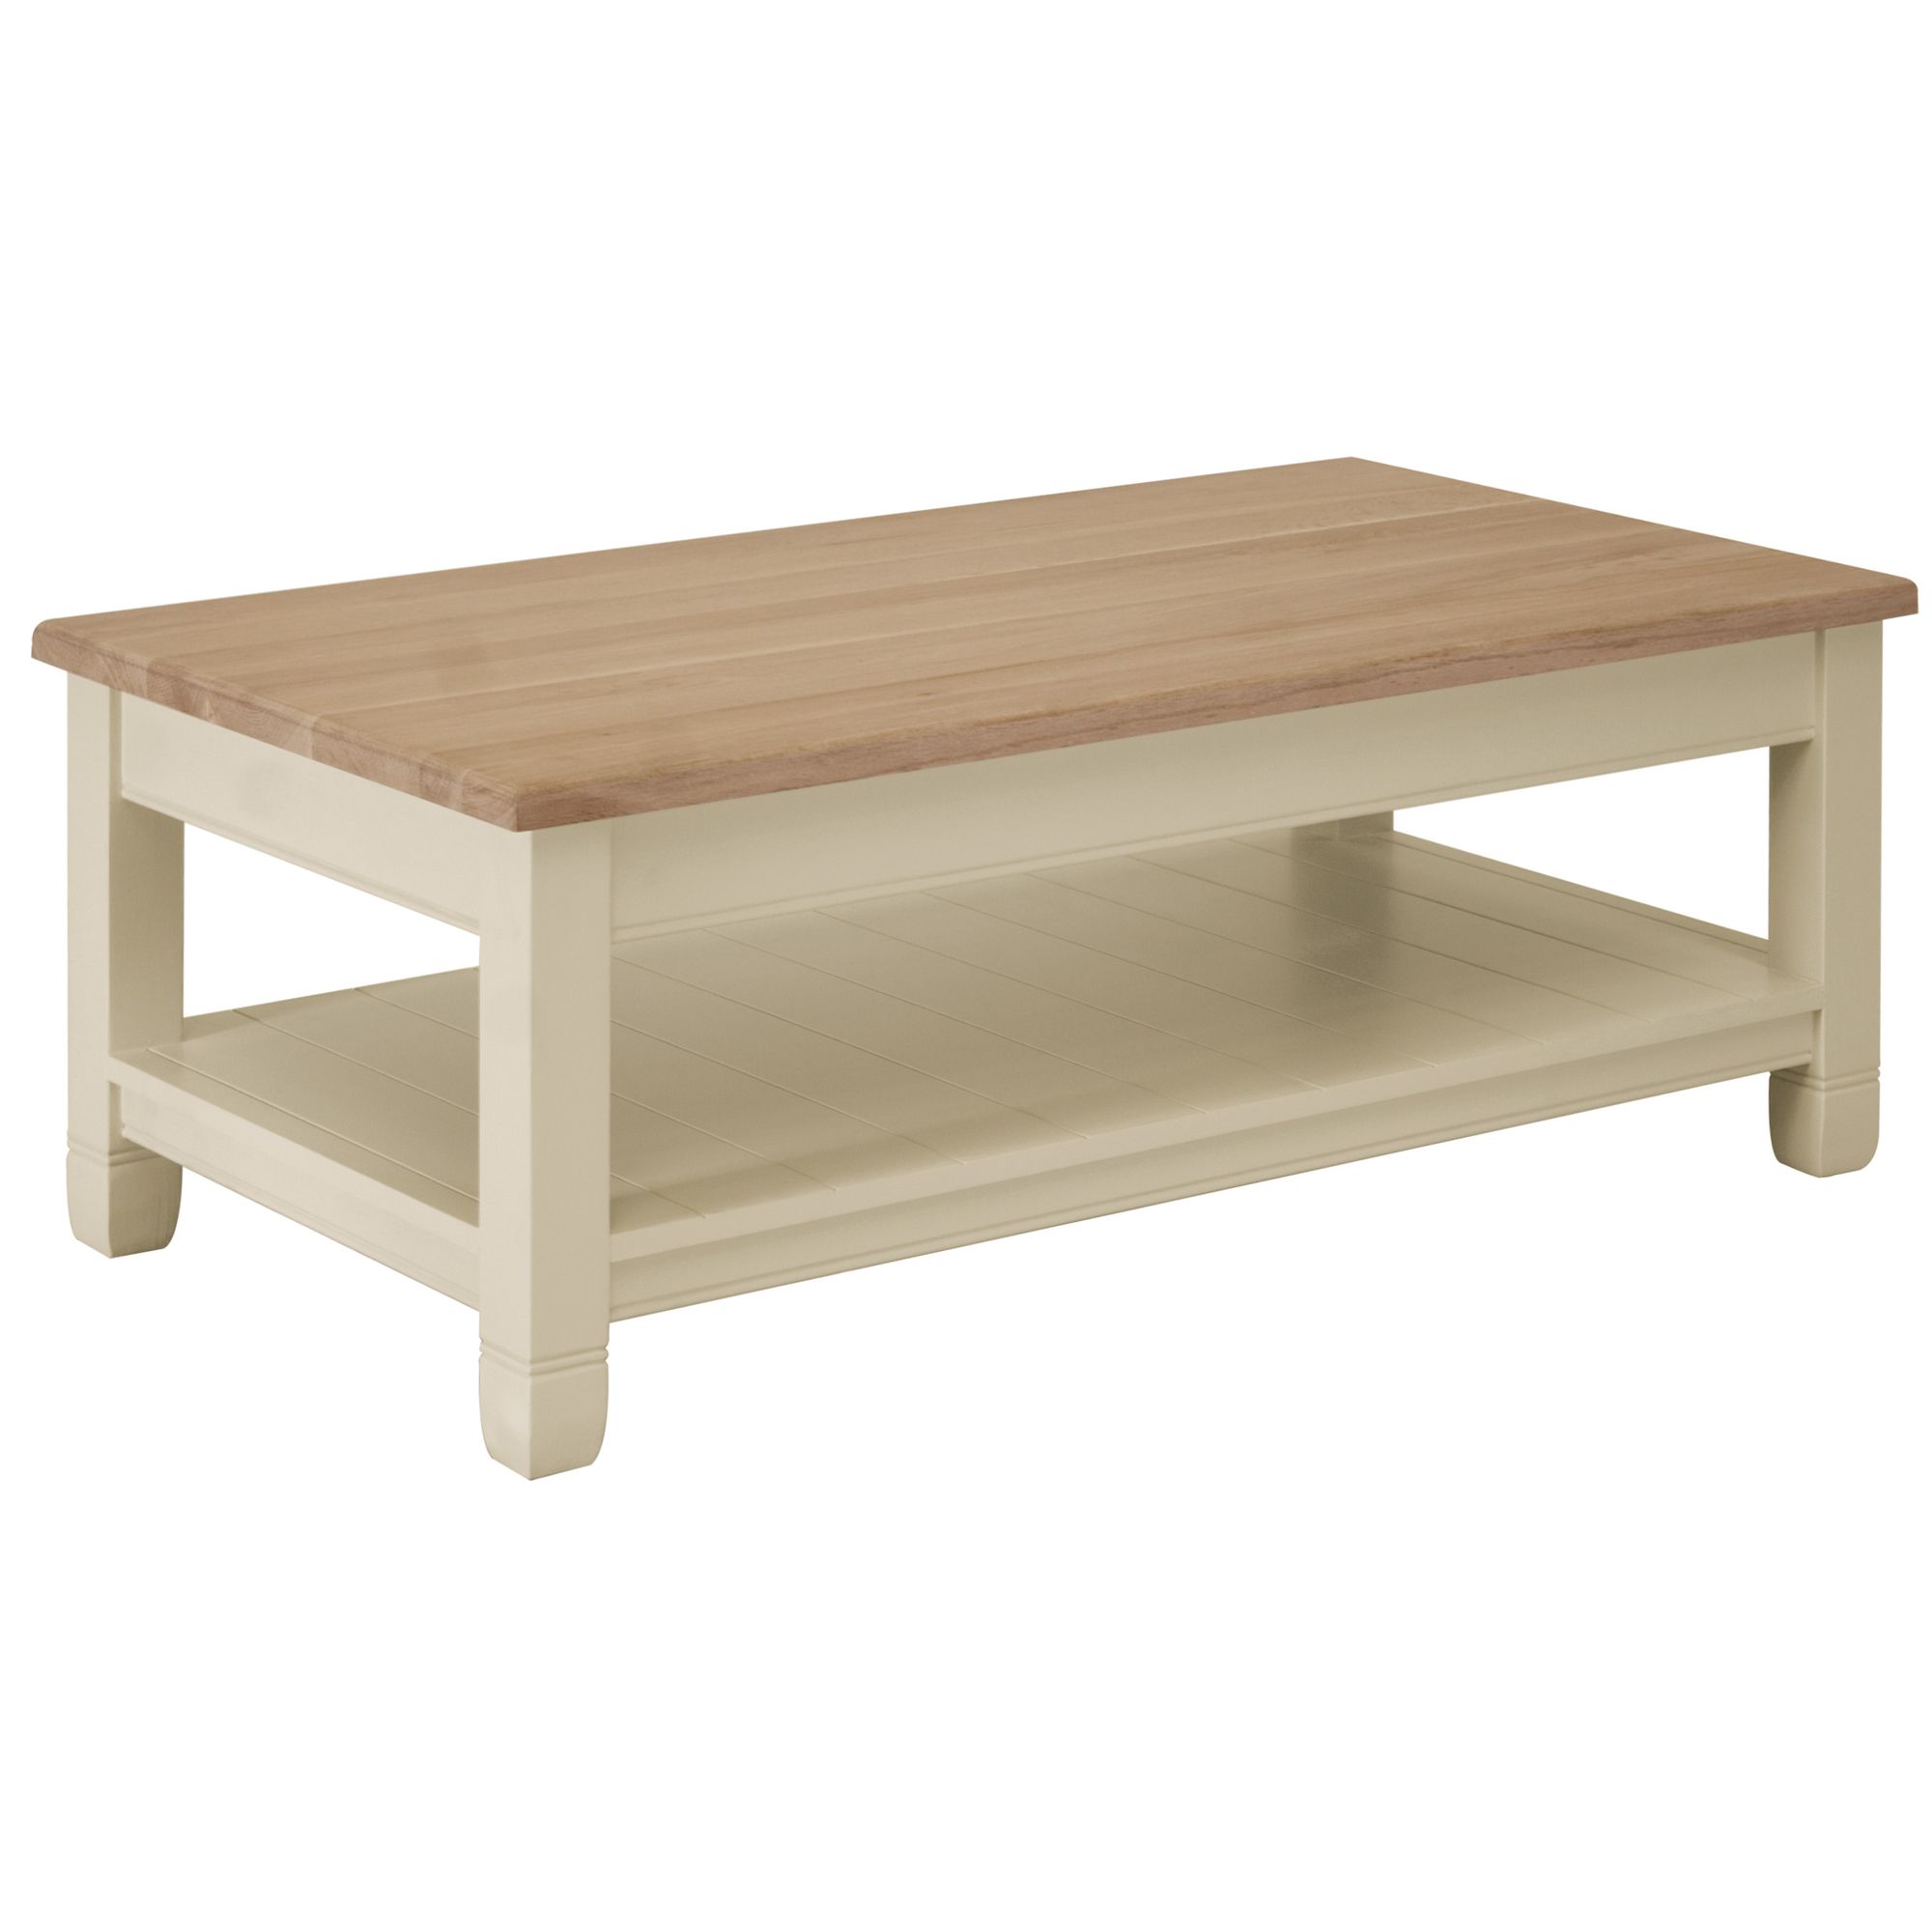 Chichester Rectangular Coffee Table,